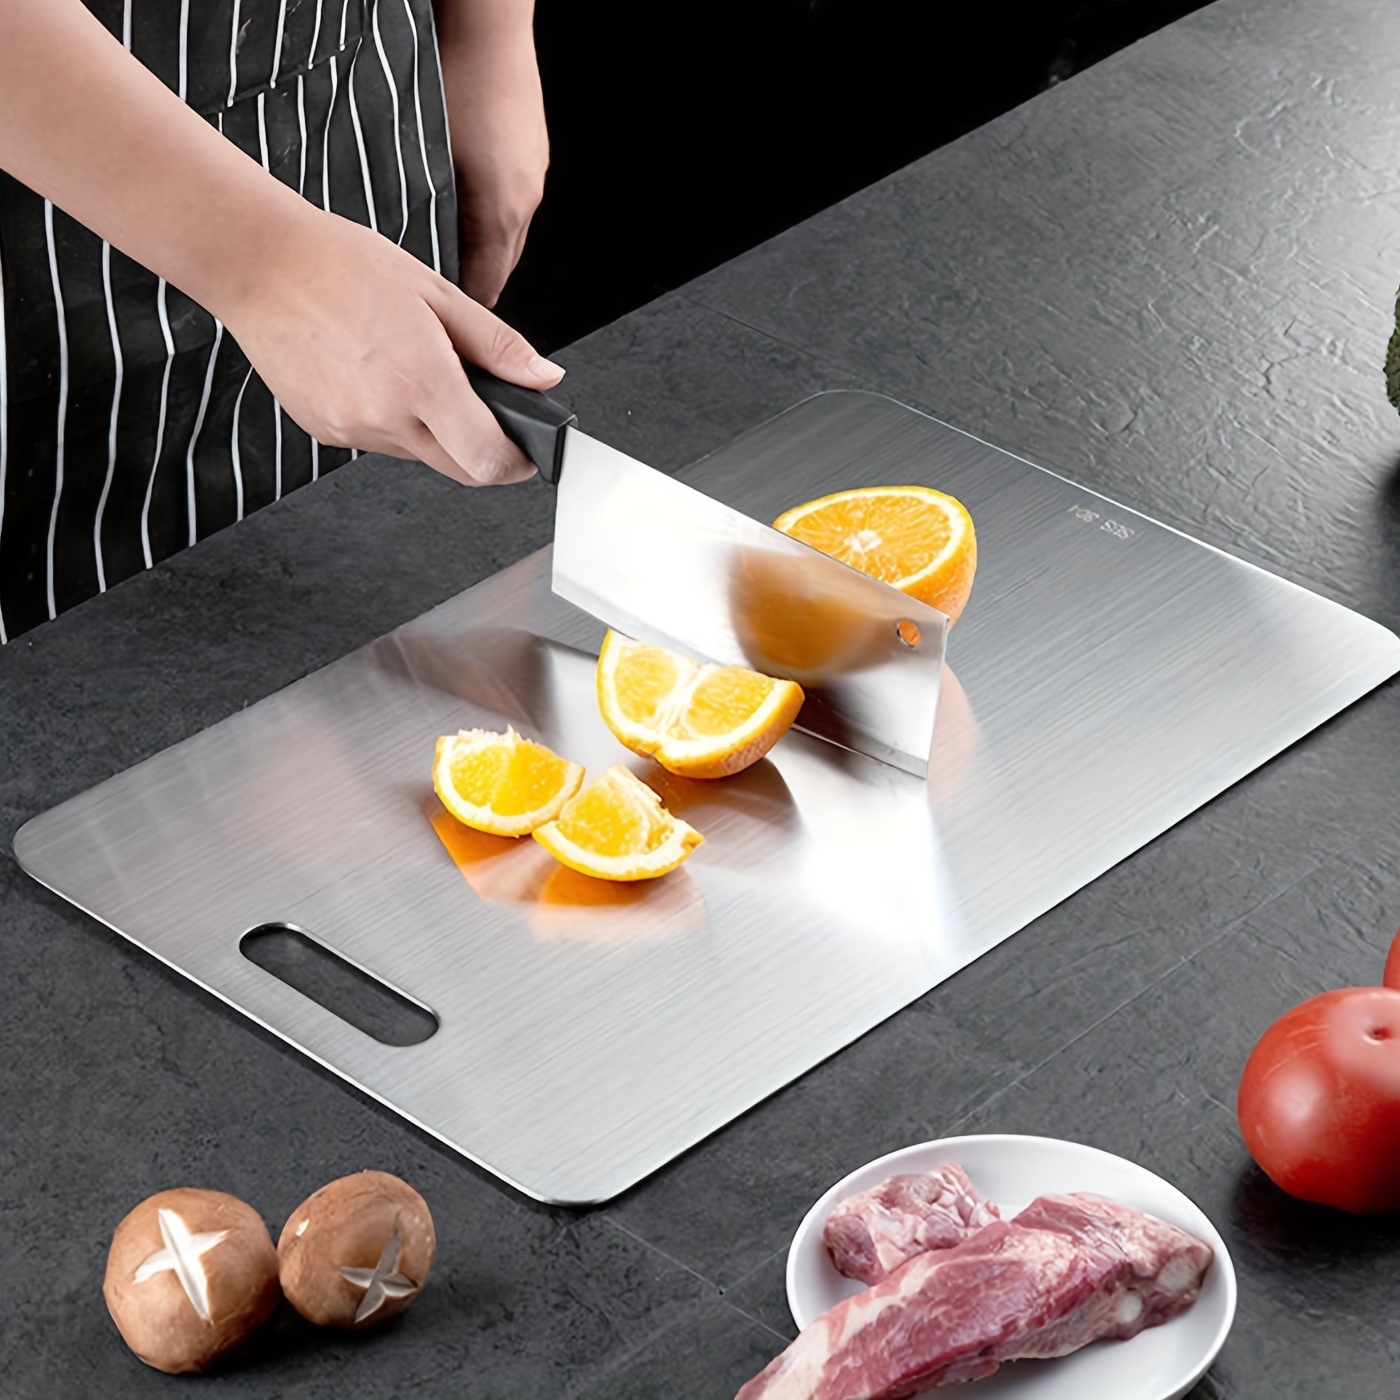 

1pc Stainless Steel Cutting Board For Kitchen - Food Safe, Durable Chopping Board For Meat, Vegetables, Fruit